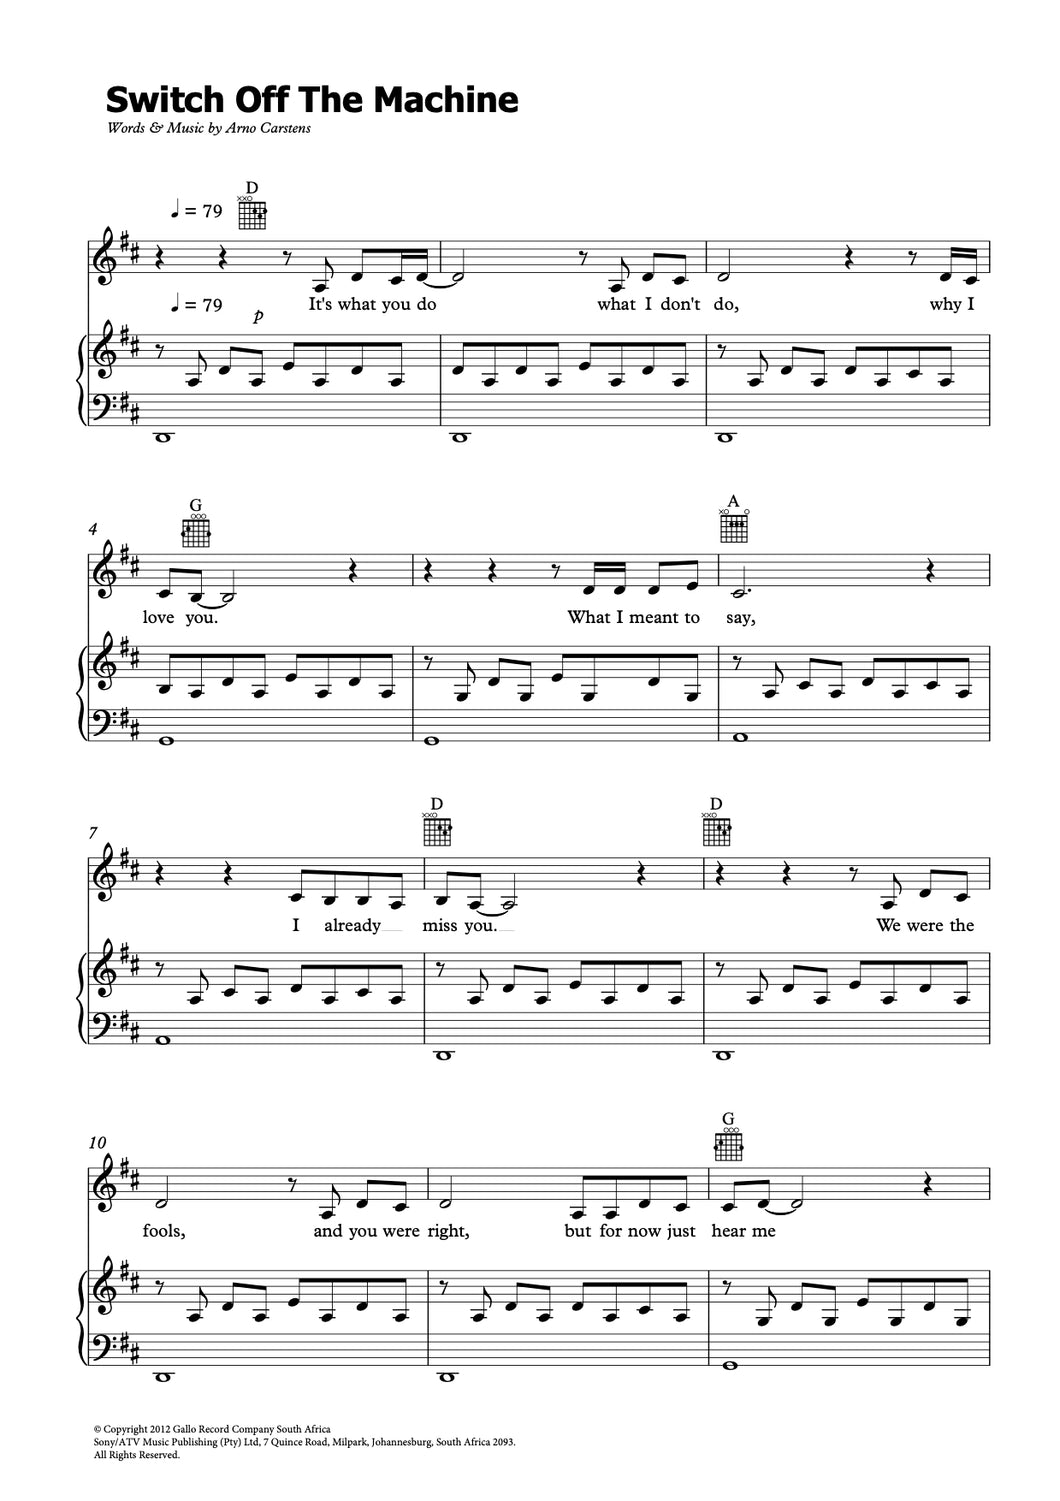 Arno Carstens - Switch Off the Machine  Sheet Music